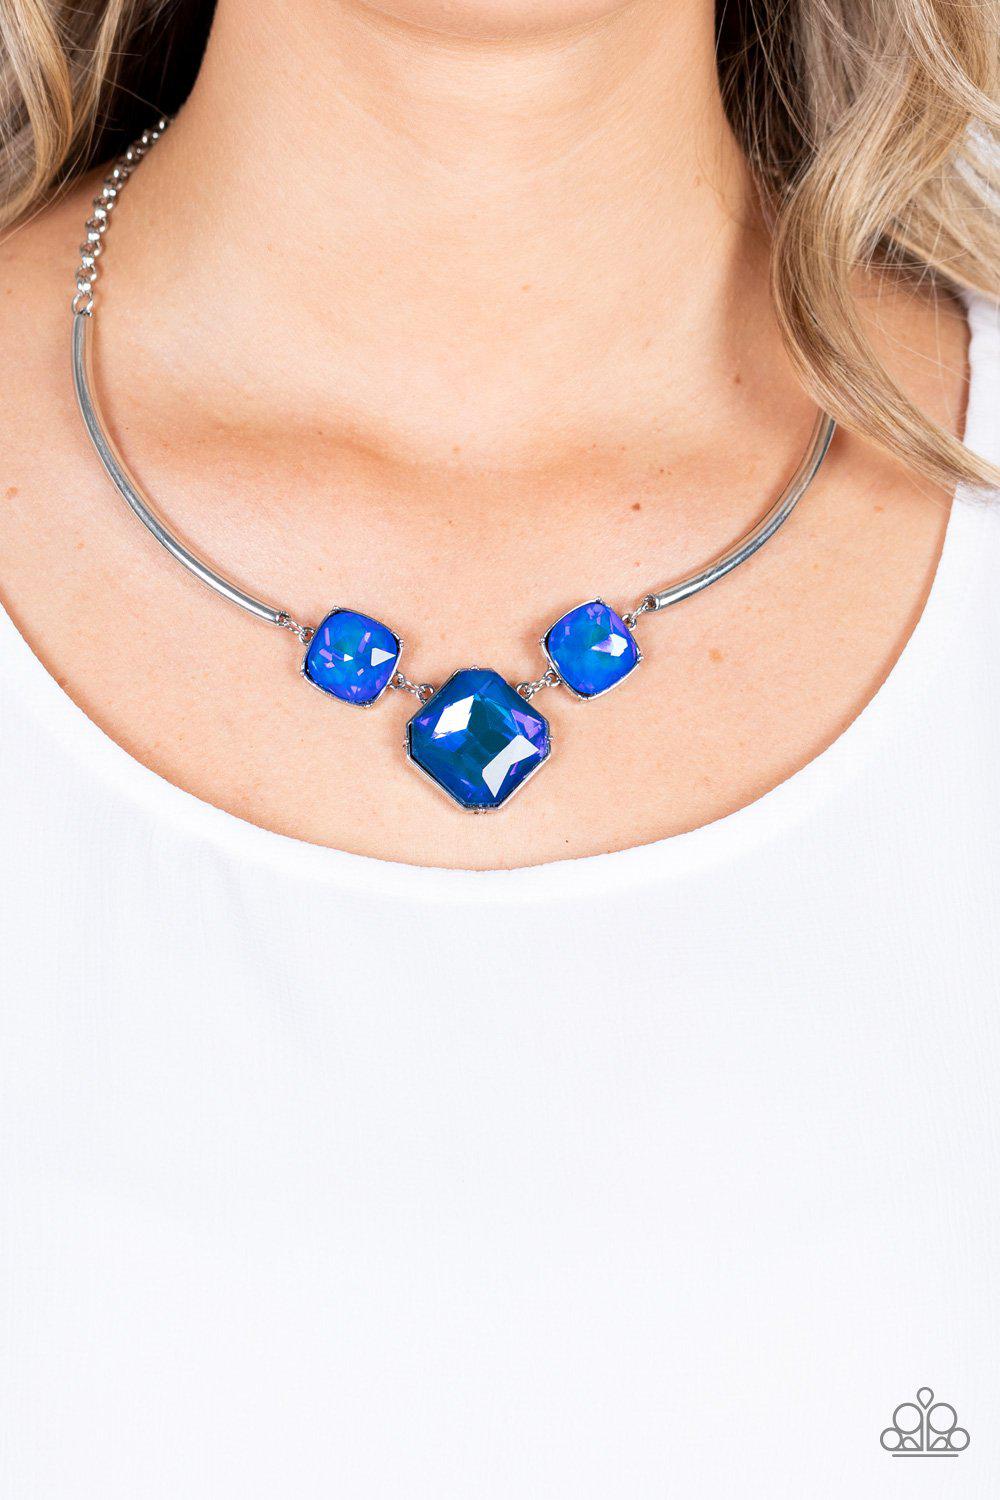 Divine IRIDESCENCE Blue Rhinestone Necklace - Paparazzi Accessories Life of the Party Exclusive October 2021- model - CarasShop.com - $5 Jewelry by Cara Jewels